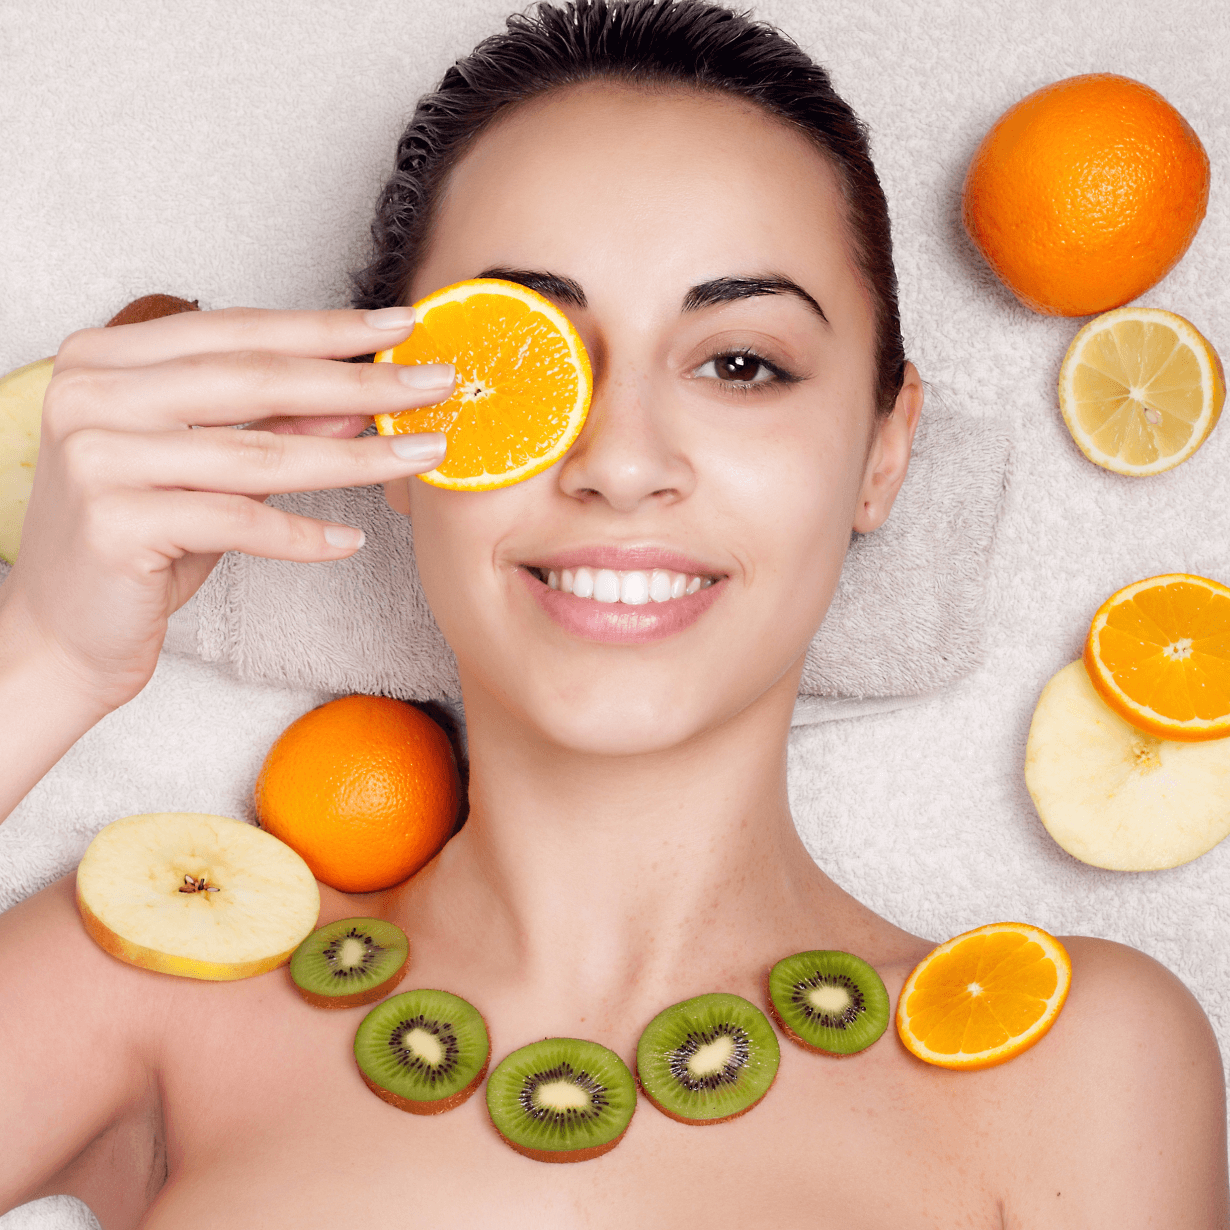 Vitamin C For Skin: Benefits, Side Effects & Best Products